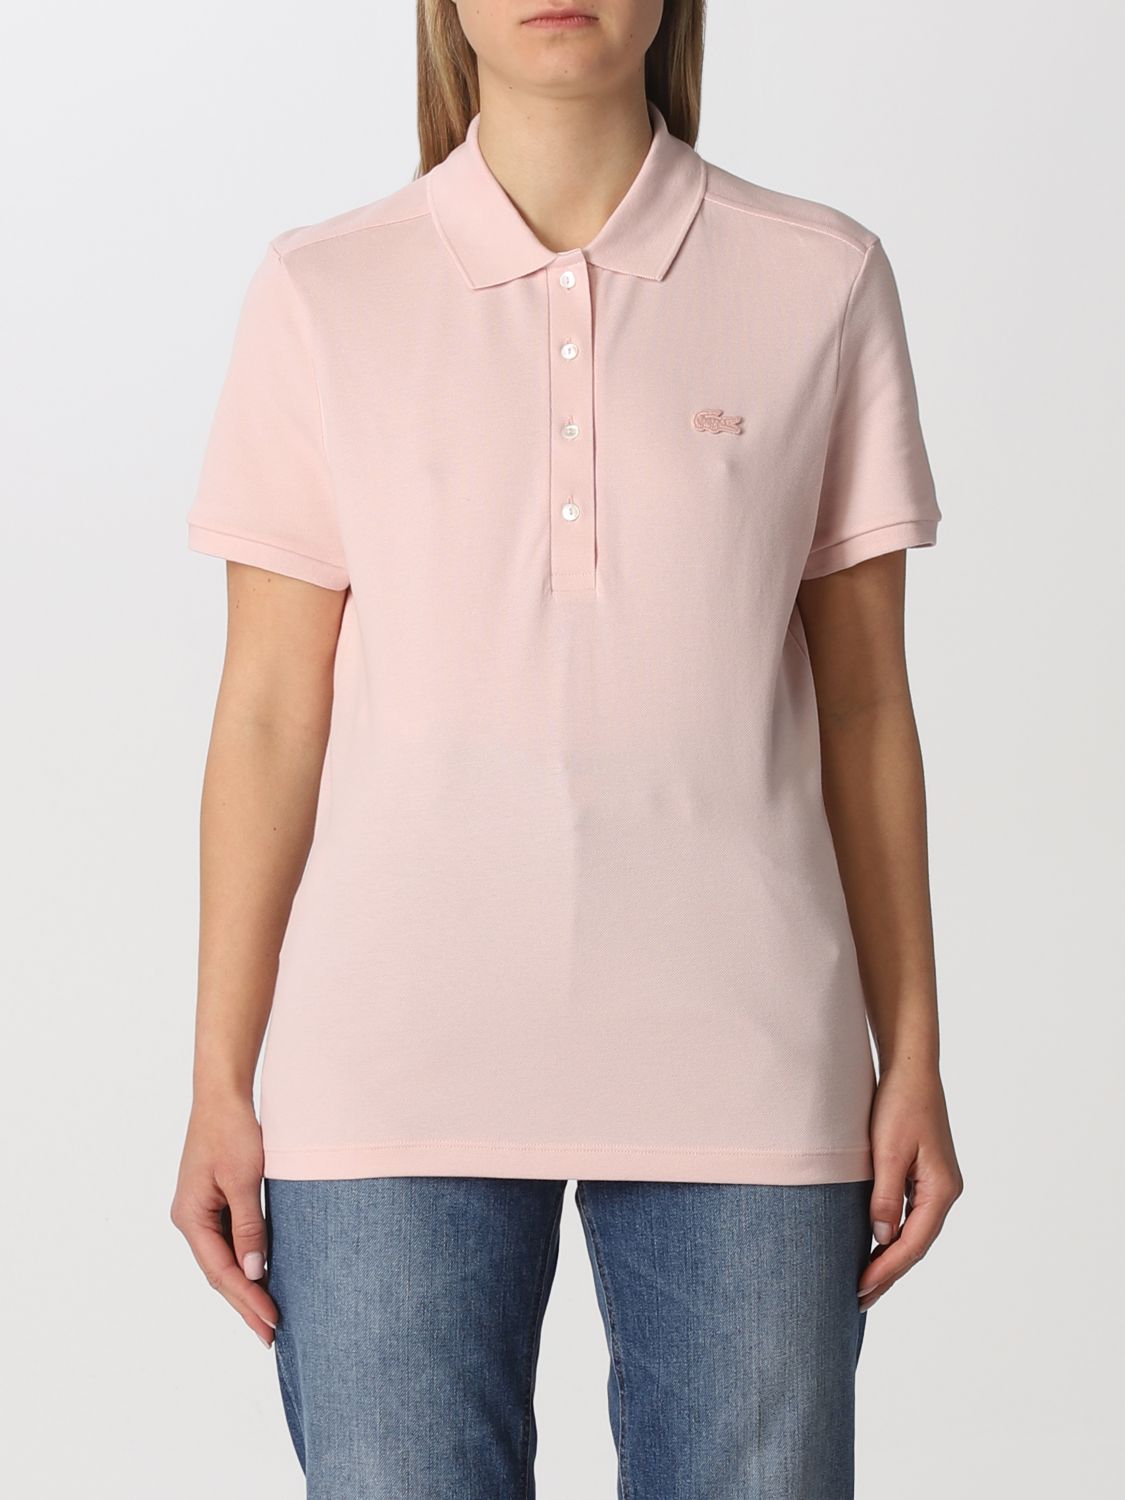 Ik zie je morgen Helemaal droog Deens LACOSTE: polo shirt for woman - Pink | Lacoste polo shirt PF5462 online on  GIGLIO.COM